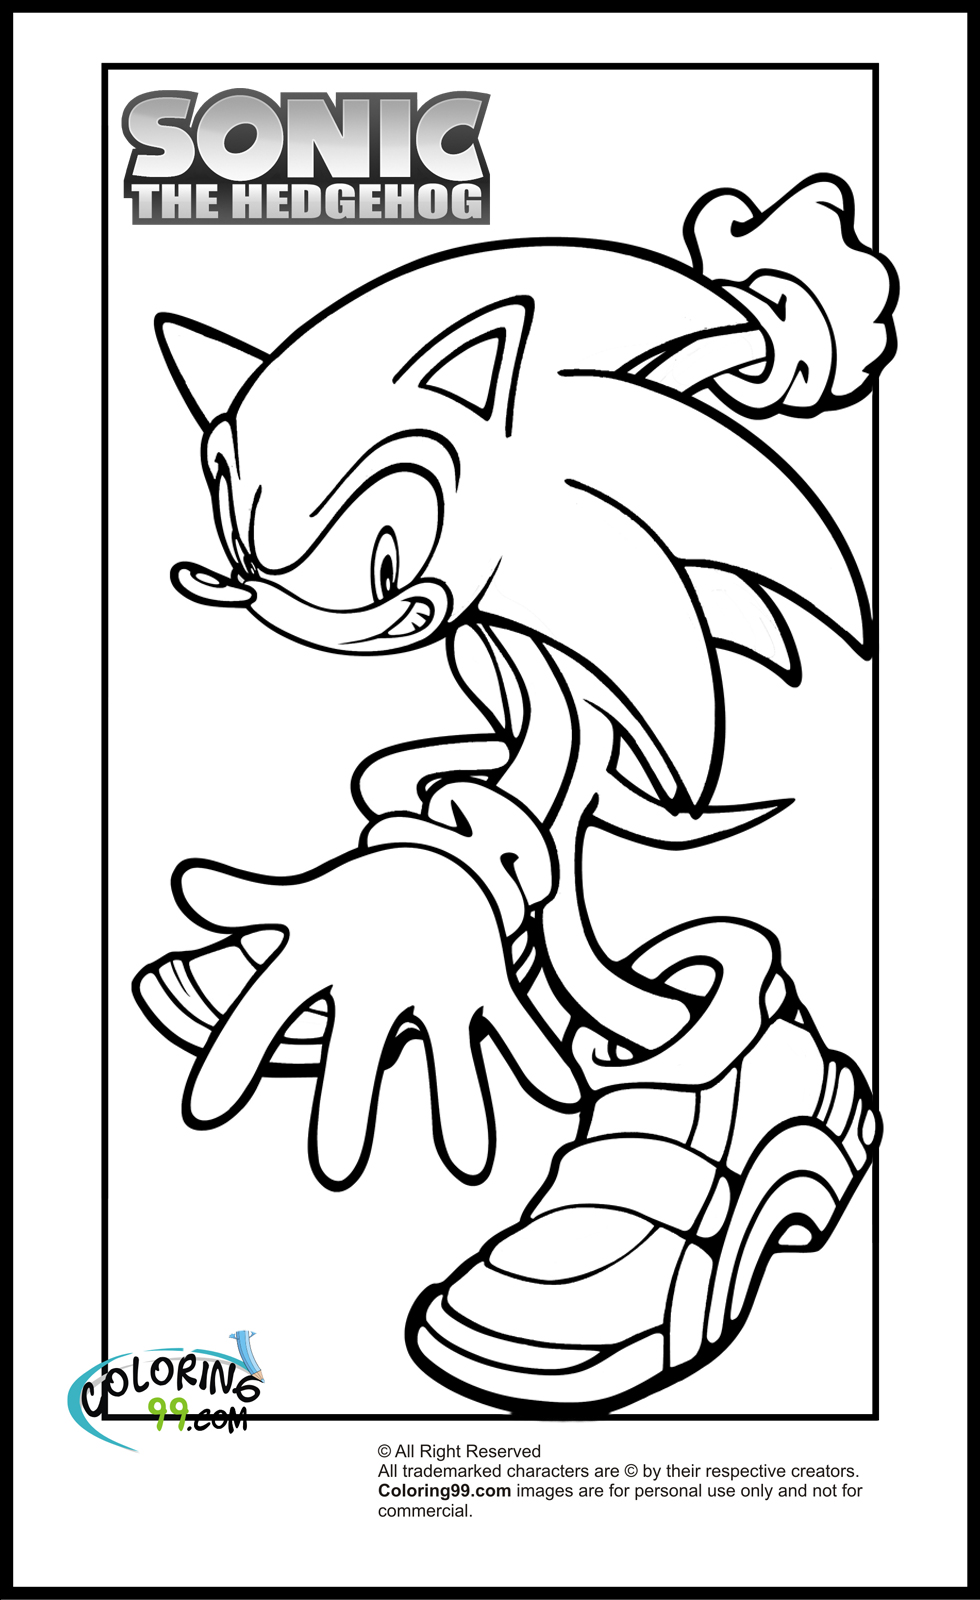 Download Sonic Coloring Pages | Team colors